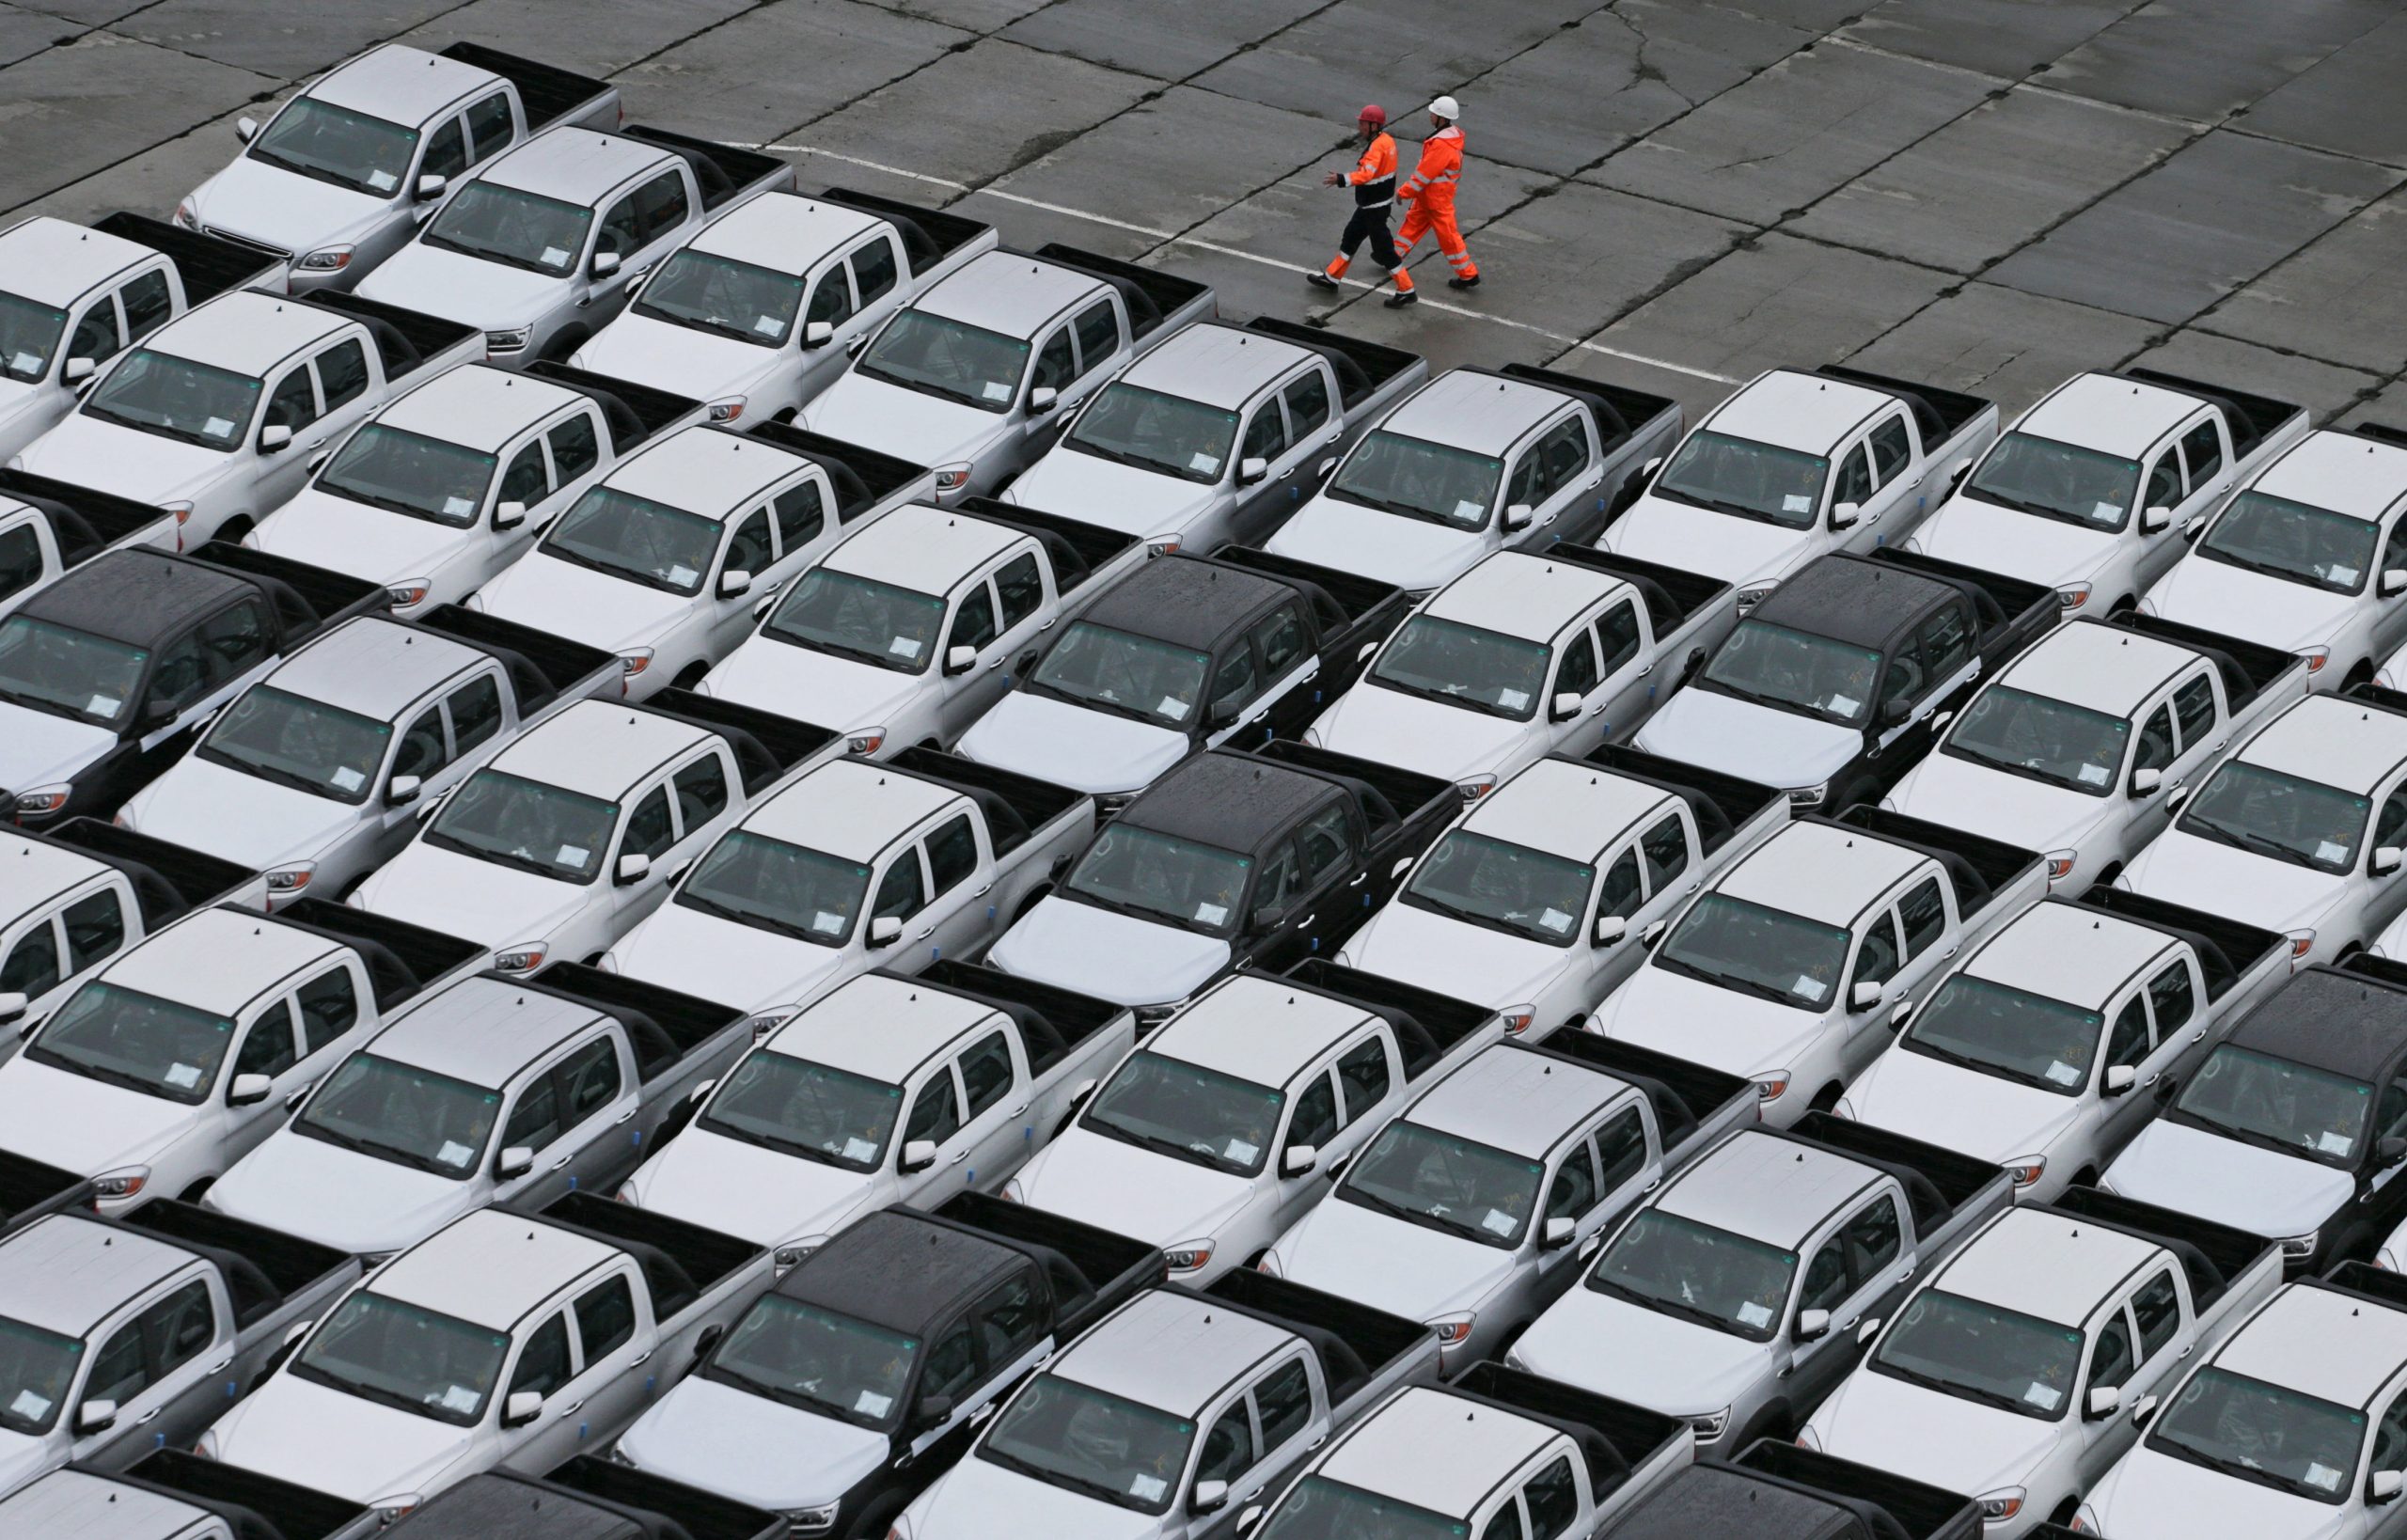 Chinese Connected Vehicles Face U.S. Regulatory Scrutiny Amid Security Fears